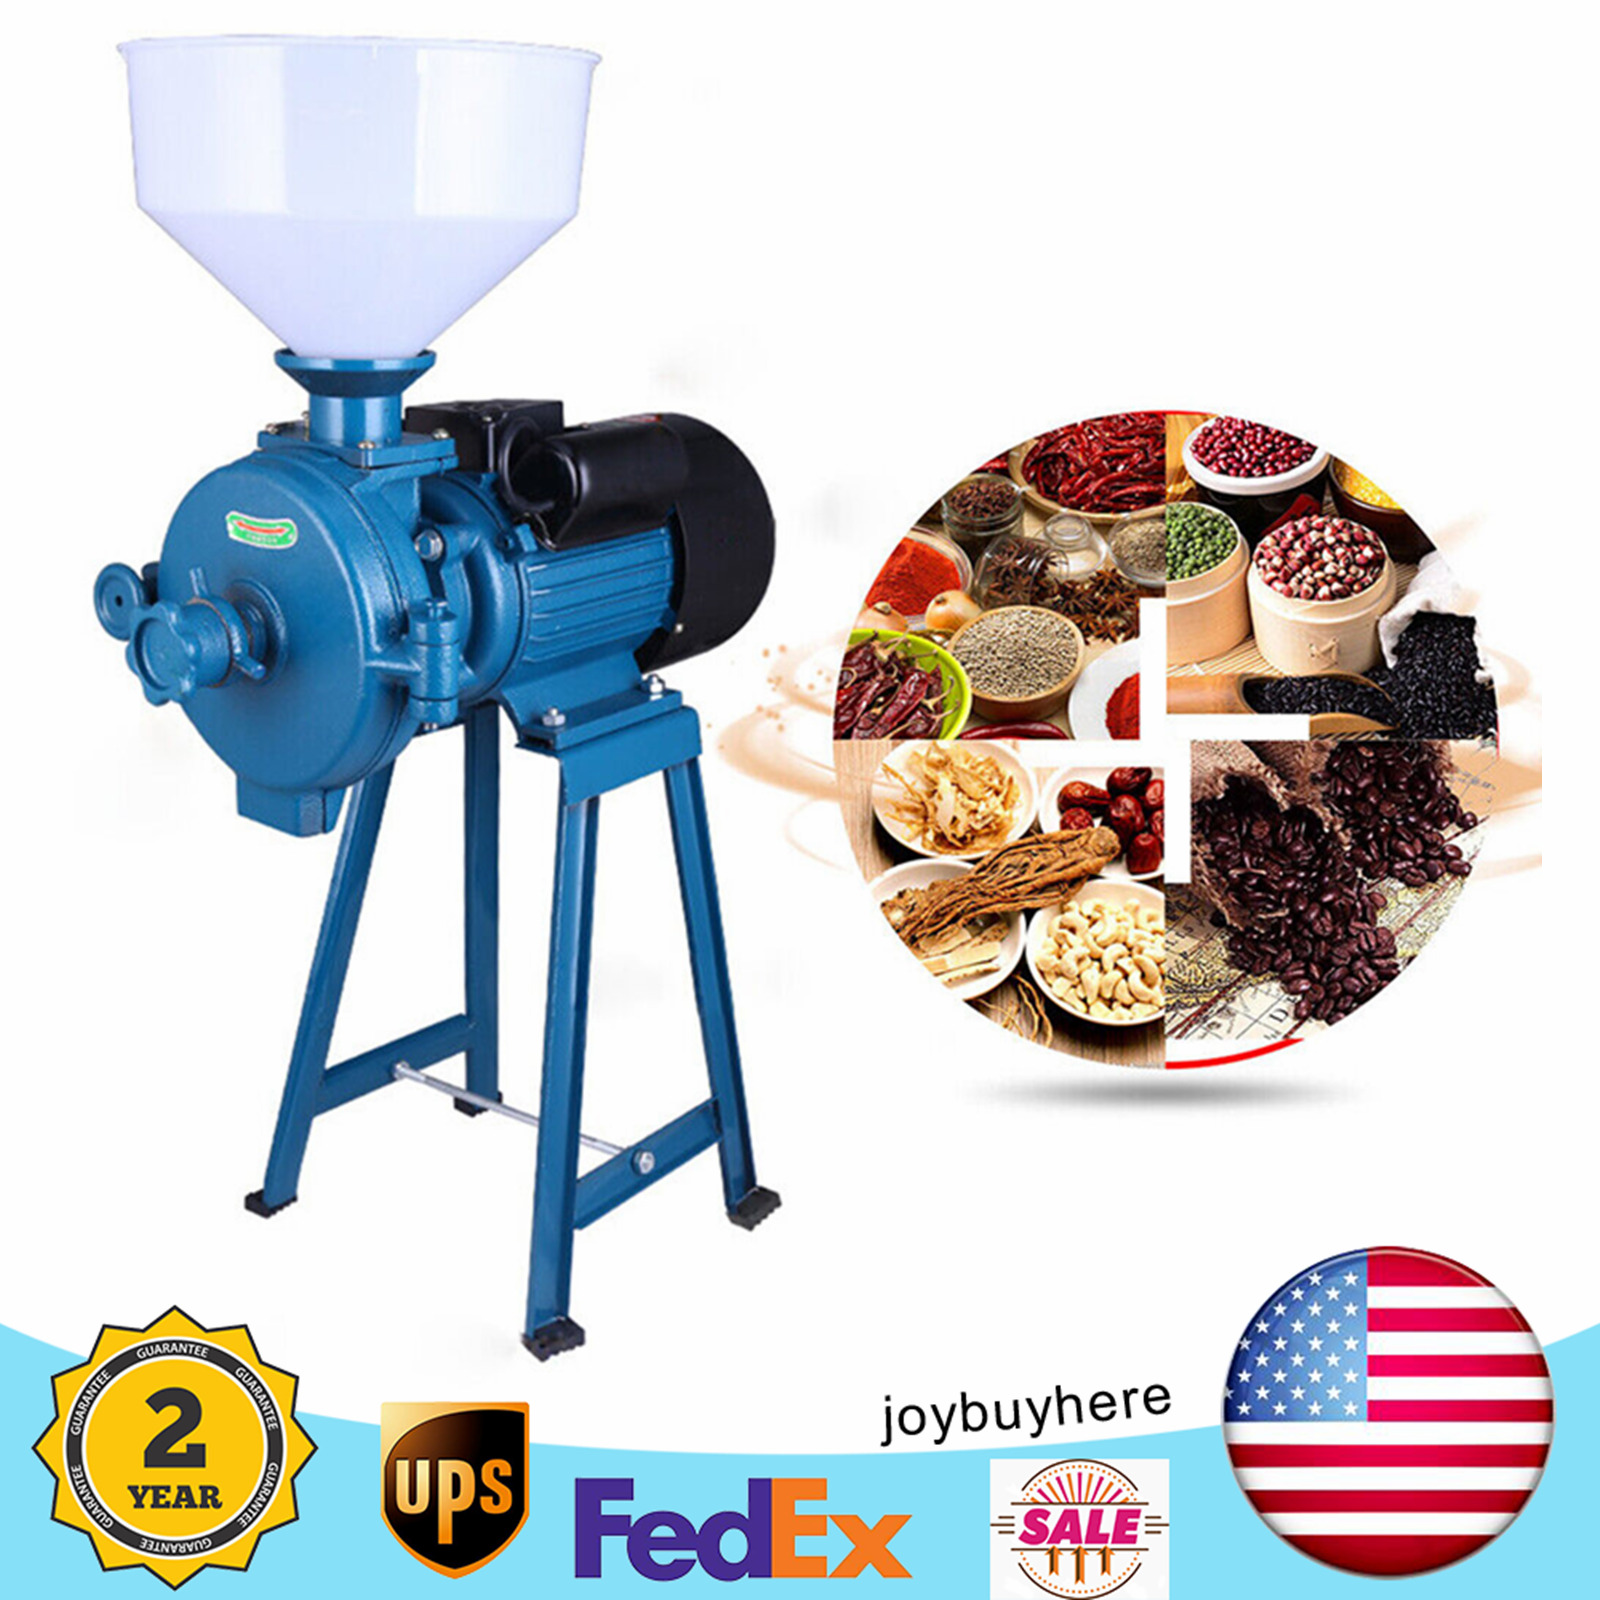 Dry Electric Grinder Feed Flour Mill Grinder For Grain Corn Wheat Oat 1500W 110V